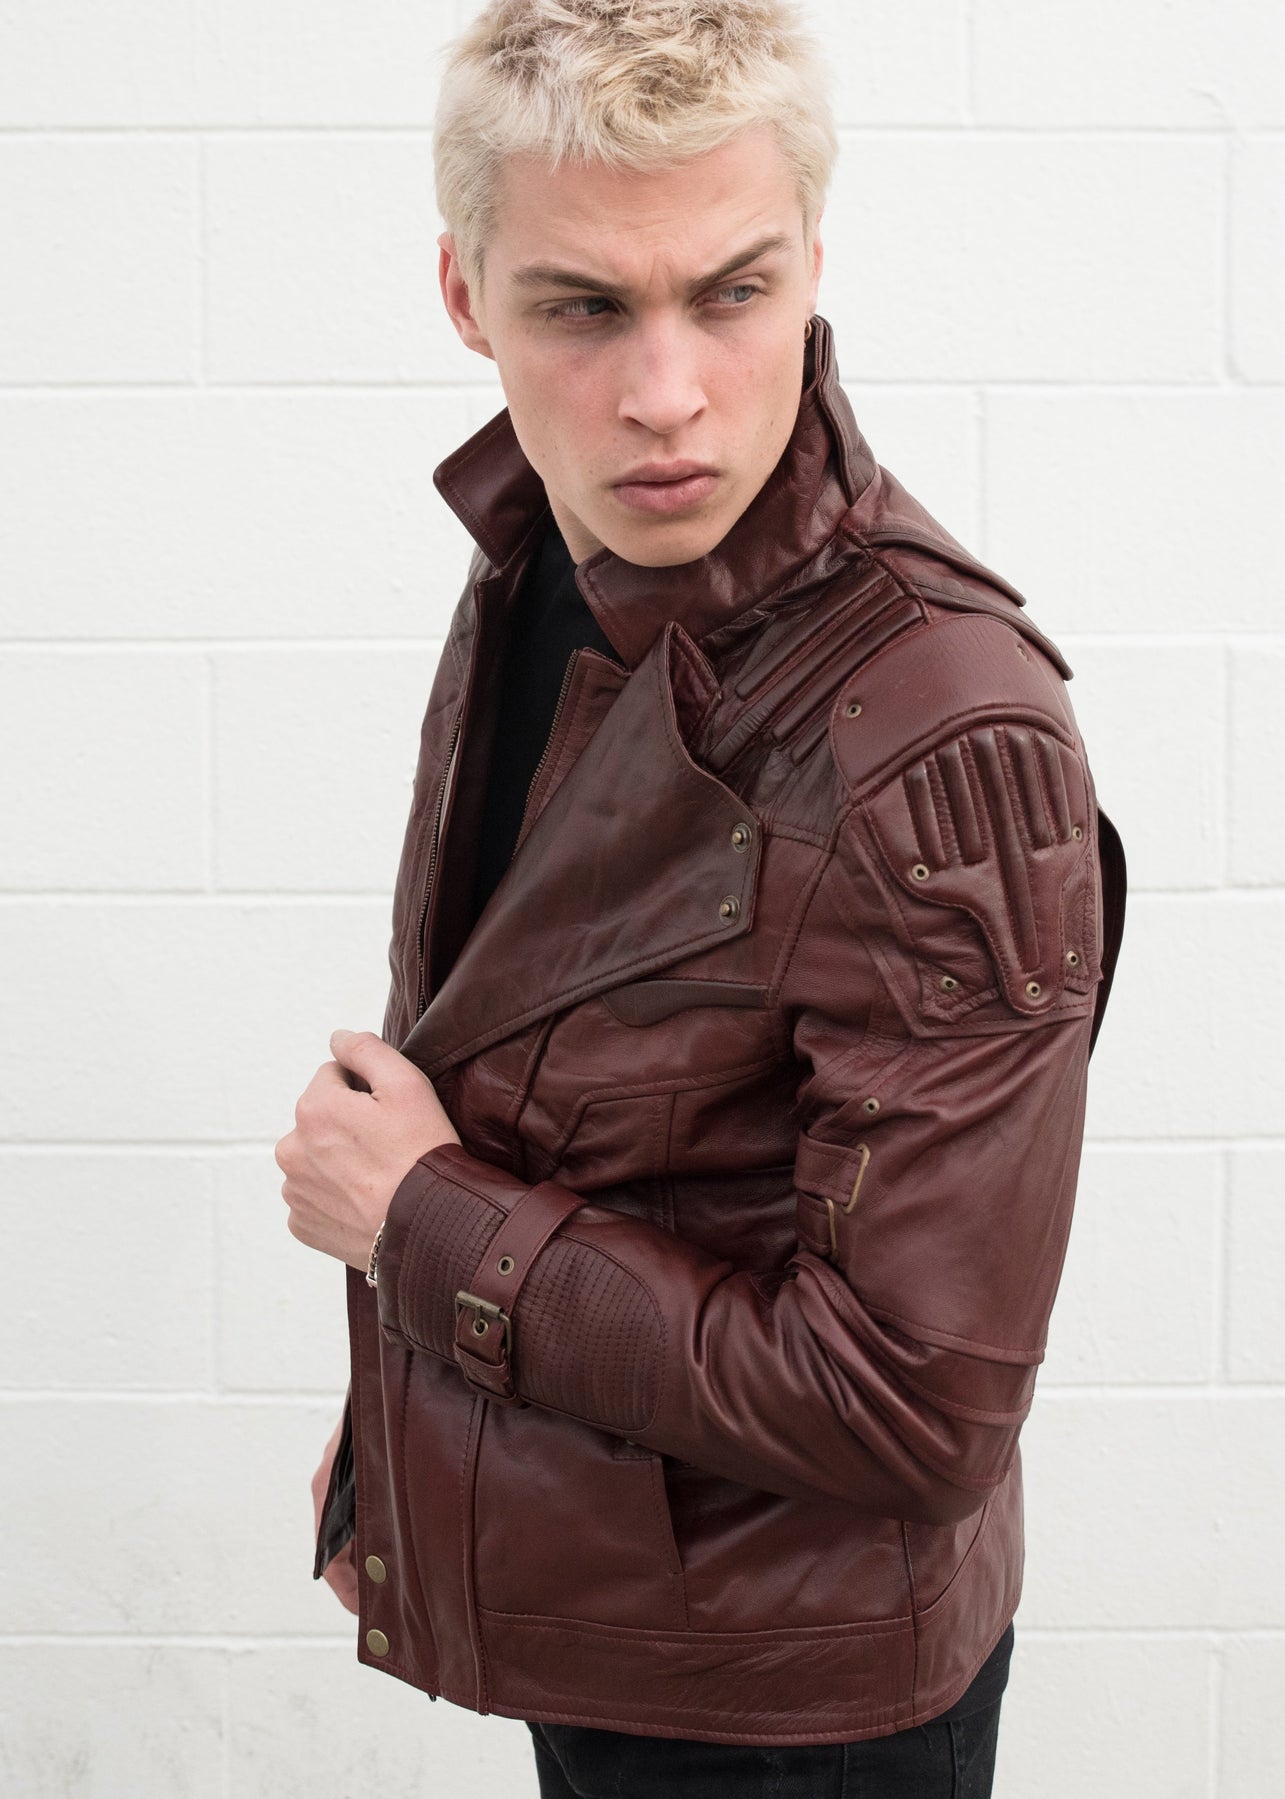 Star-Lord Guardians of the Galaxy (Marvel) Mens Dark Red Leather Jacket by Luca Designs